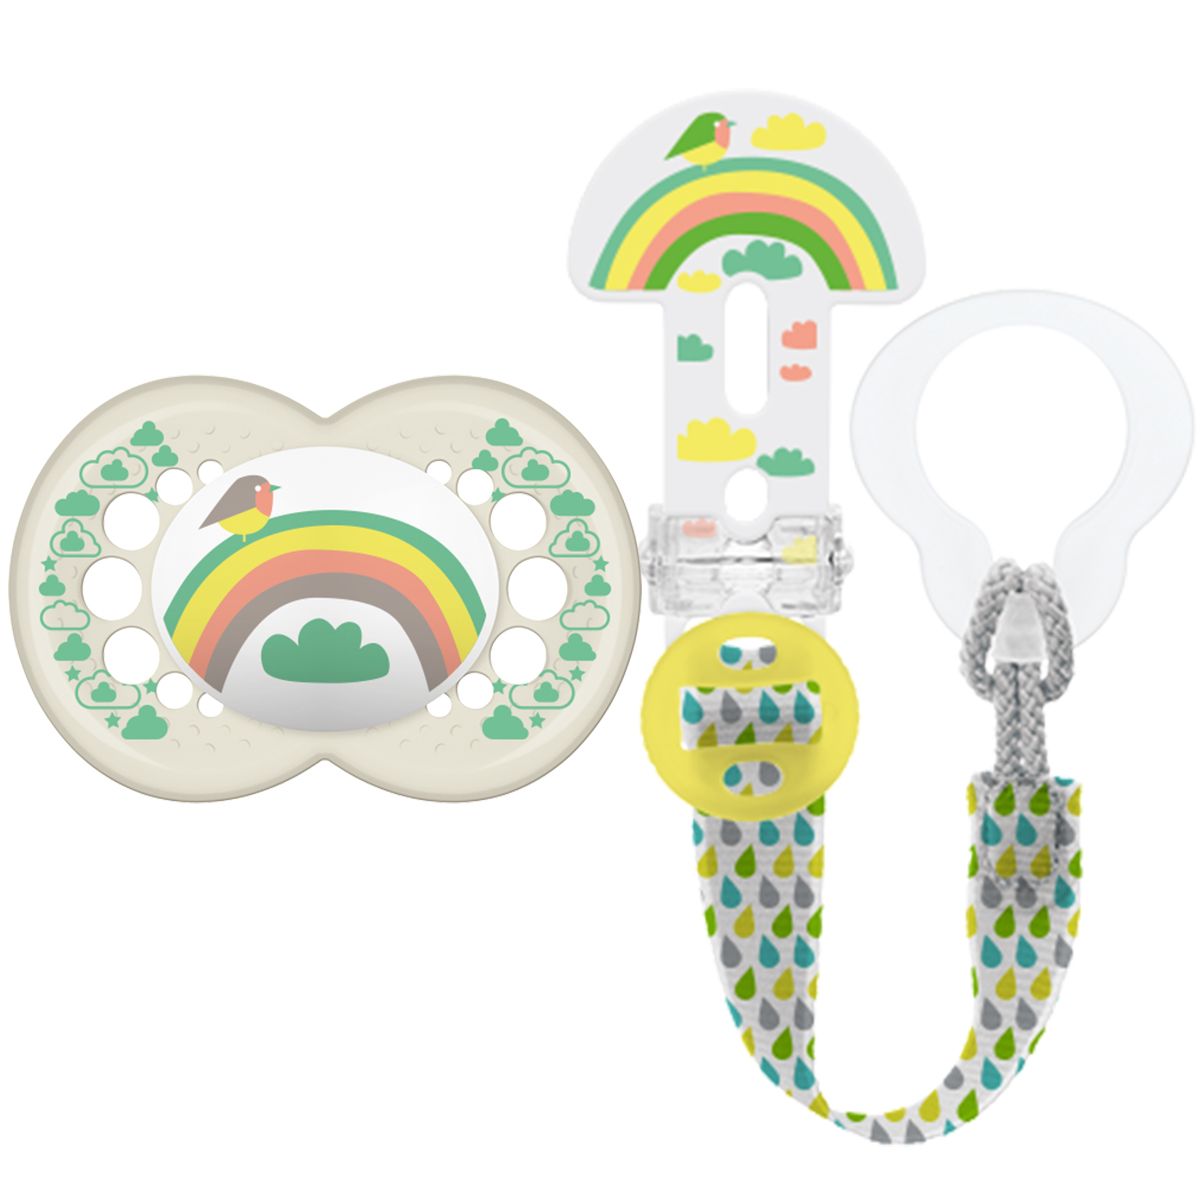 Tommy's Rainbow Silicone Soother - 6+ Months - Unisex - Green/Ivory White